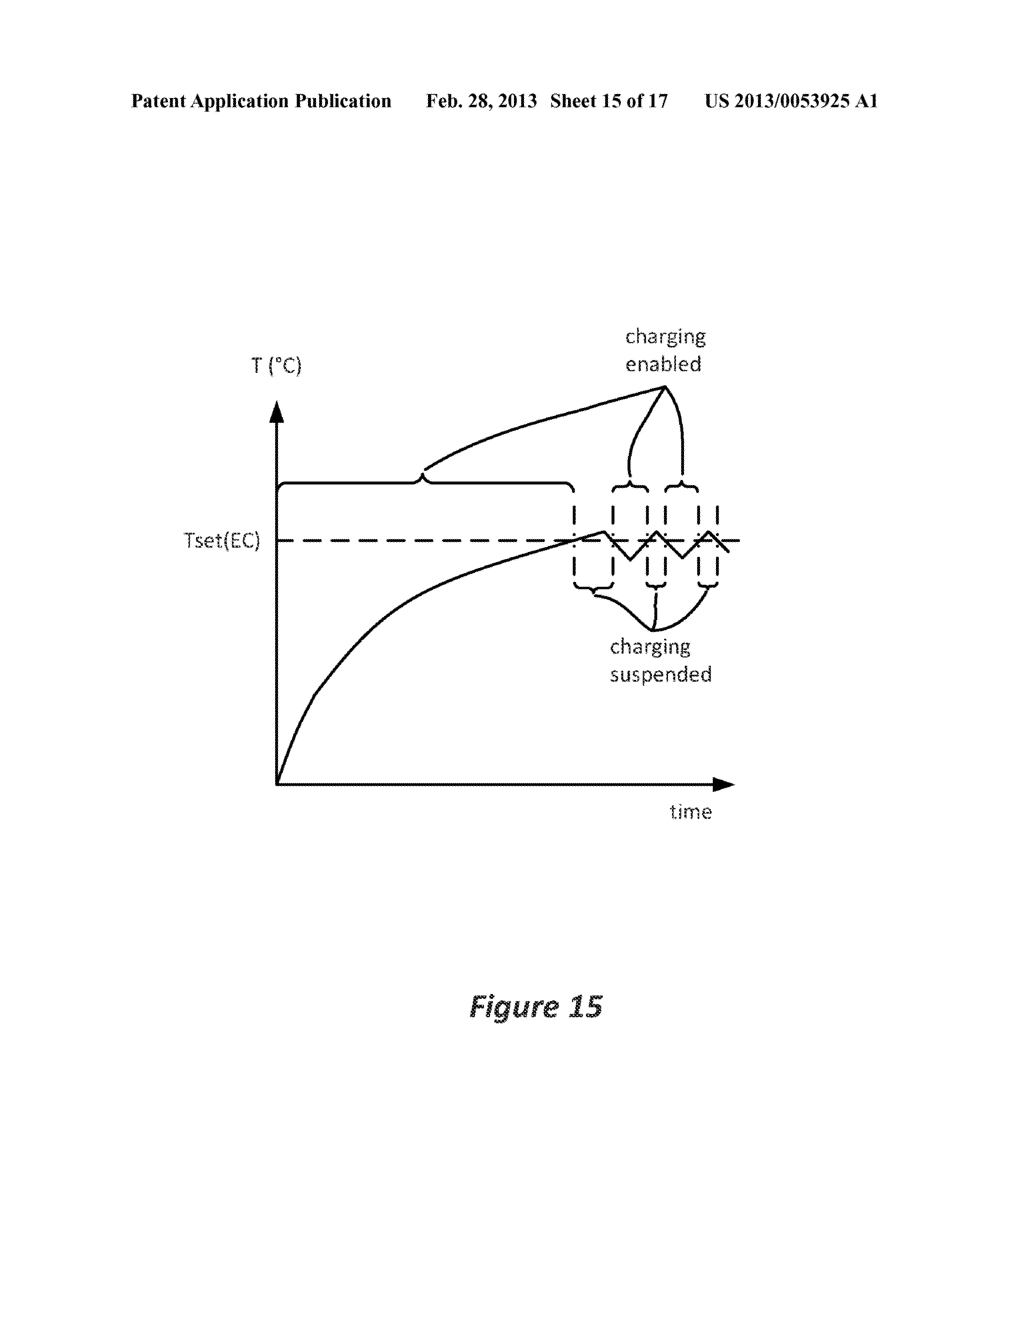 External Charger Usable with an Implantable Medical Device Having a     Programmable or Time-Varying Temperature Set Point - diagram, schematic, and image 16